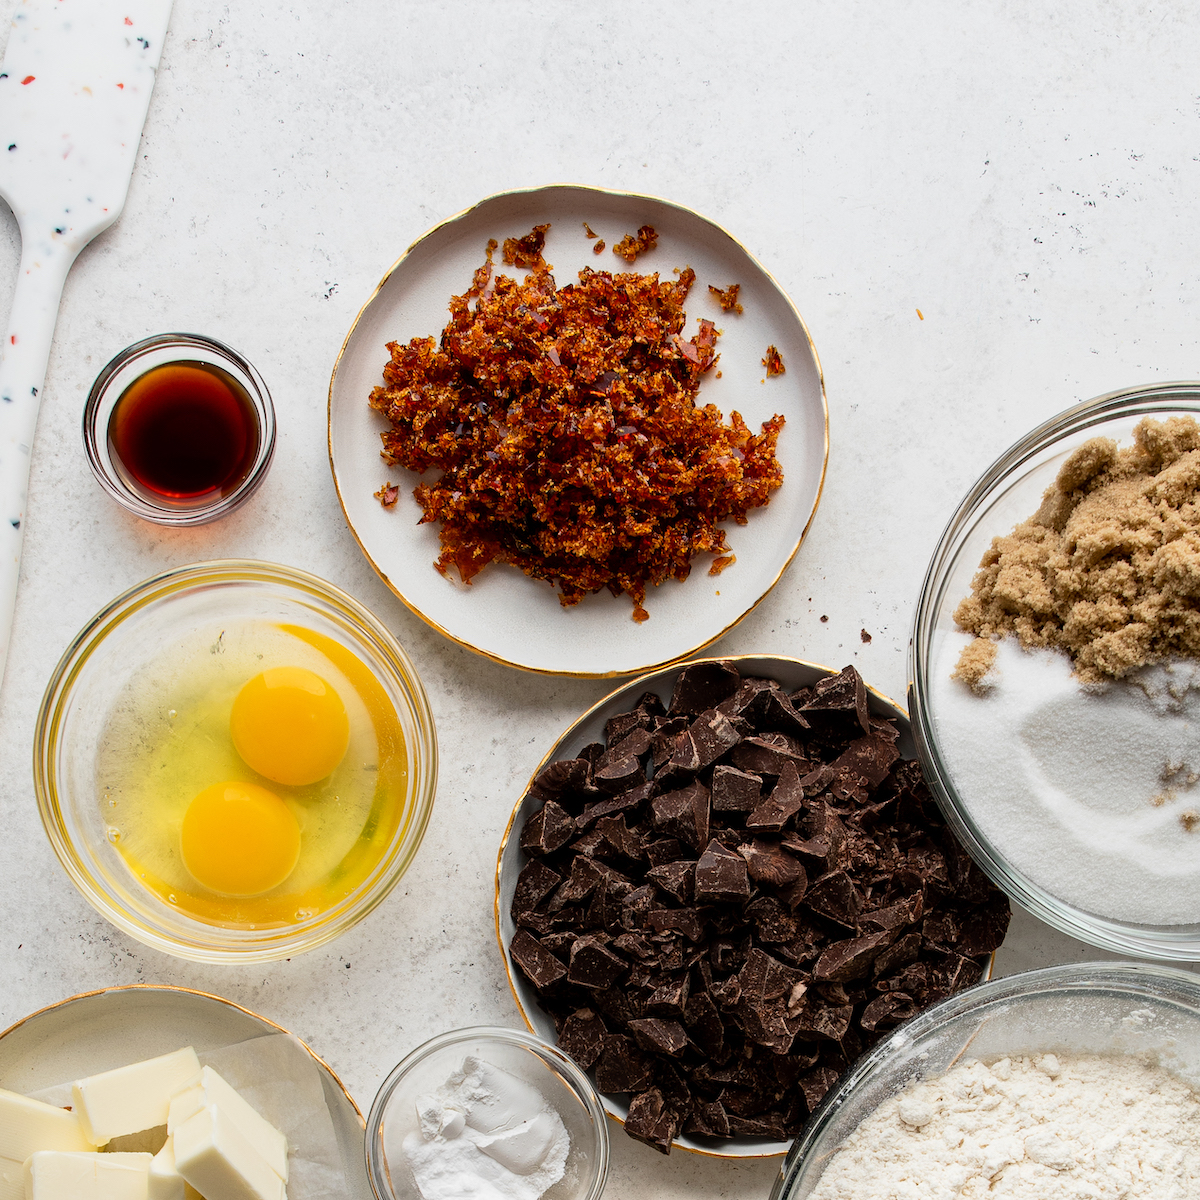 All the ingredients needed to make these cookies on a white surface.